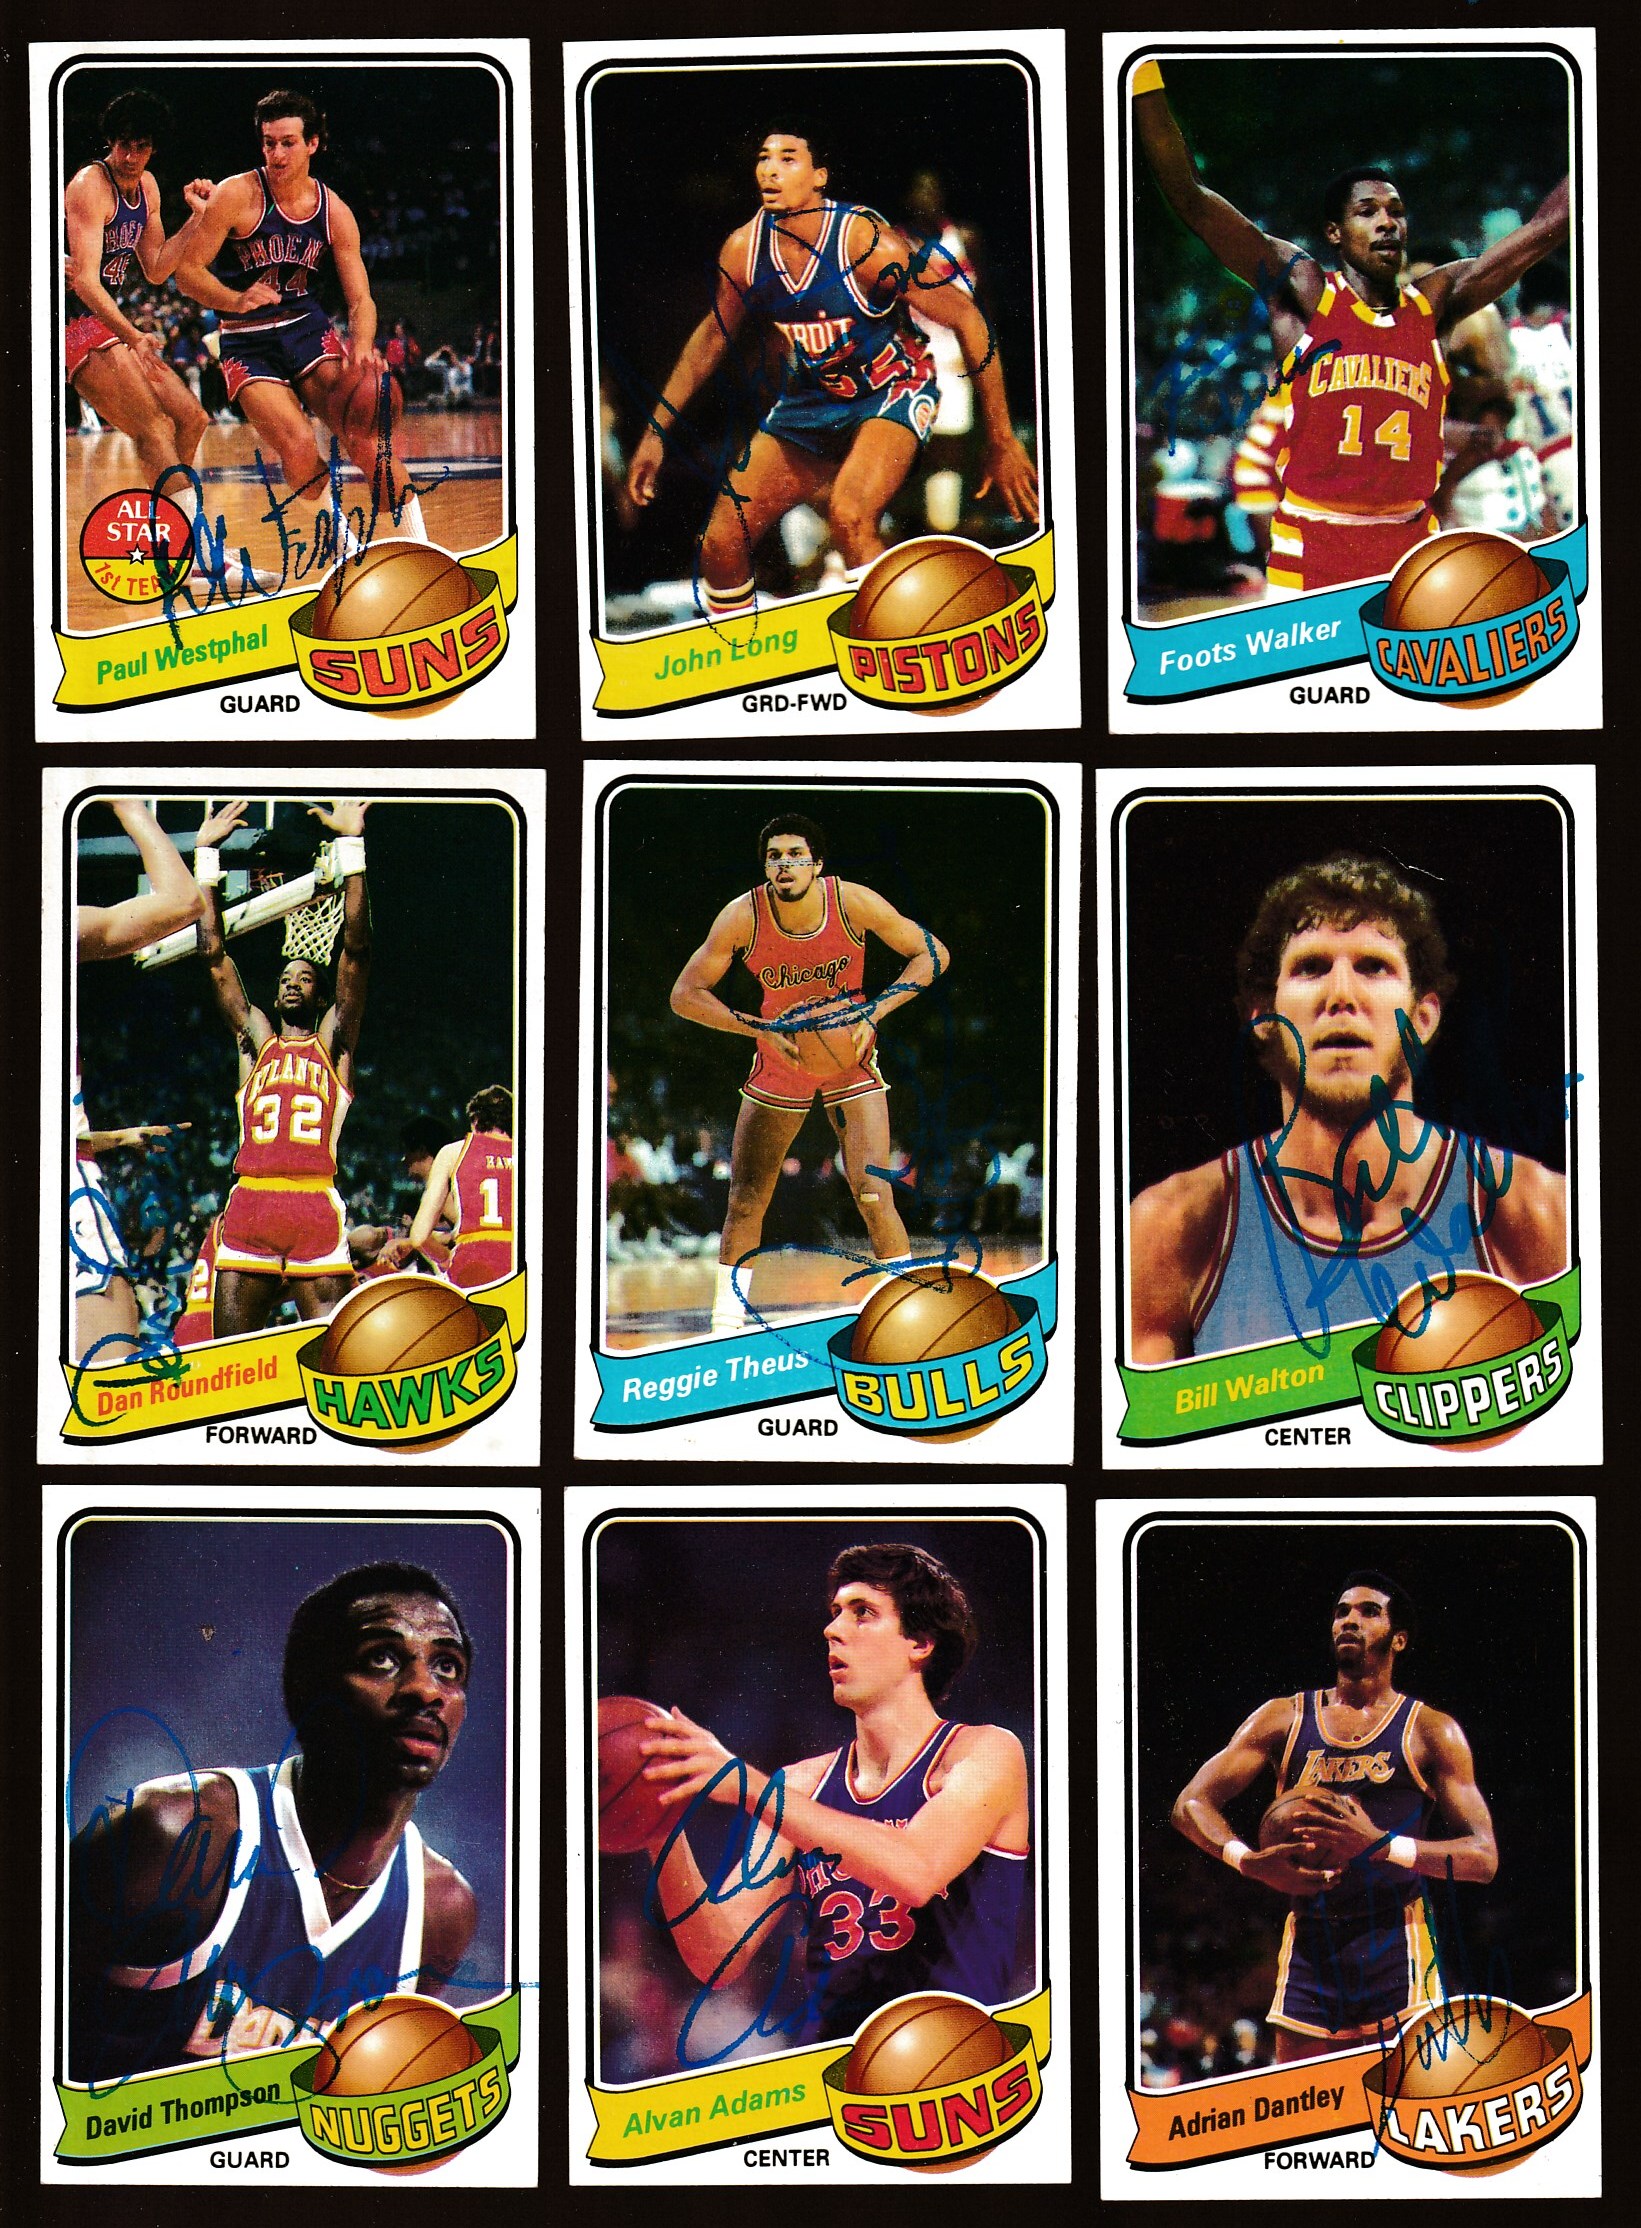 1979-80 Topps Basketball # 42 Foots Walker AUTOGRAPHED (Cavaliers) Basketball cards value